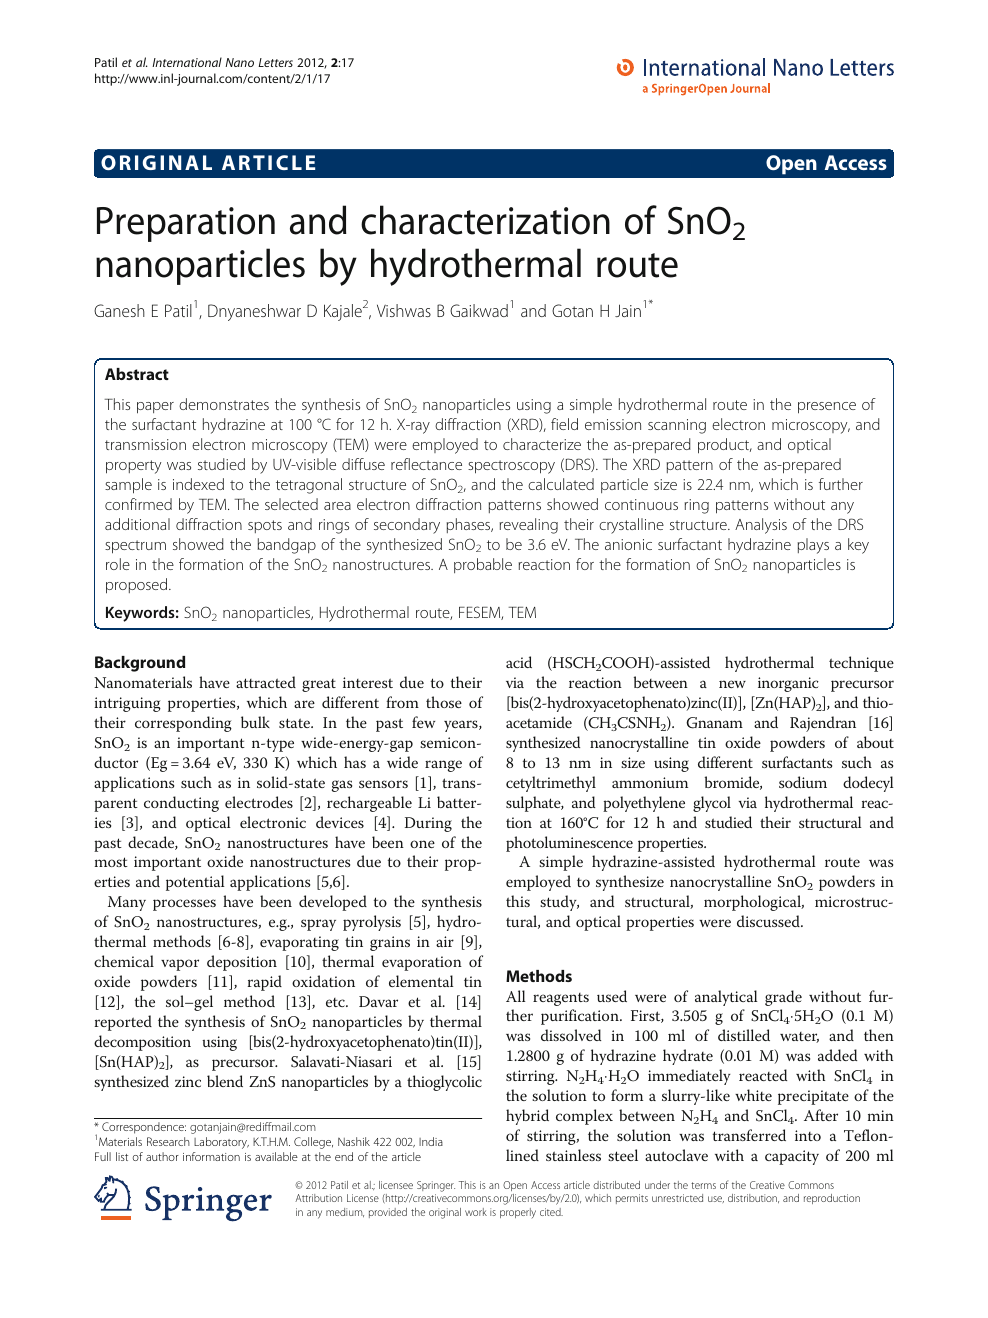 Preparation And Characterization Of Sno2 Nanoparticles By Hydrothermal Route Topic Of Research Paper In Nano Technology Download Scholarly Article Pdf And Read For Free On Cyberleninka Open Science Hub